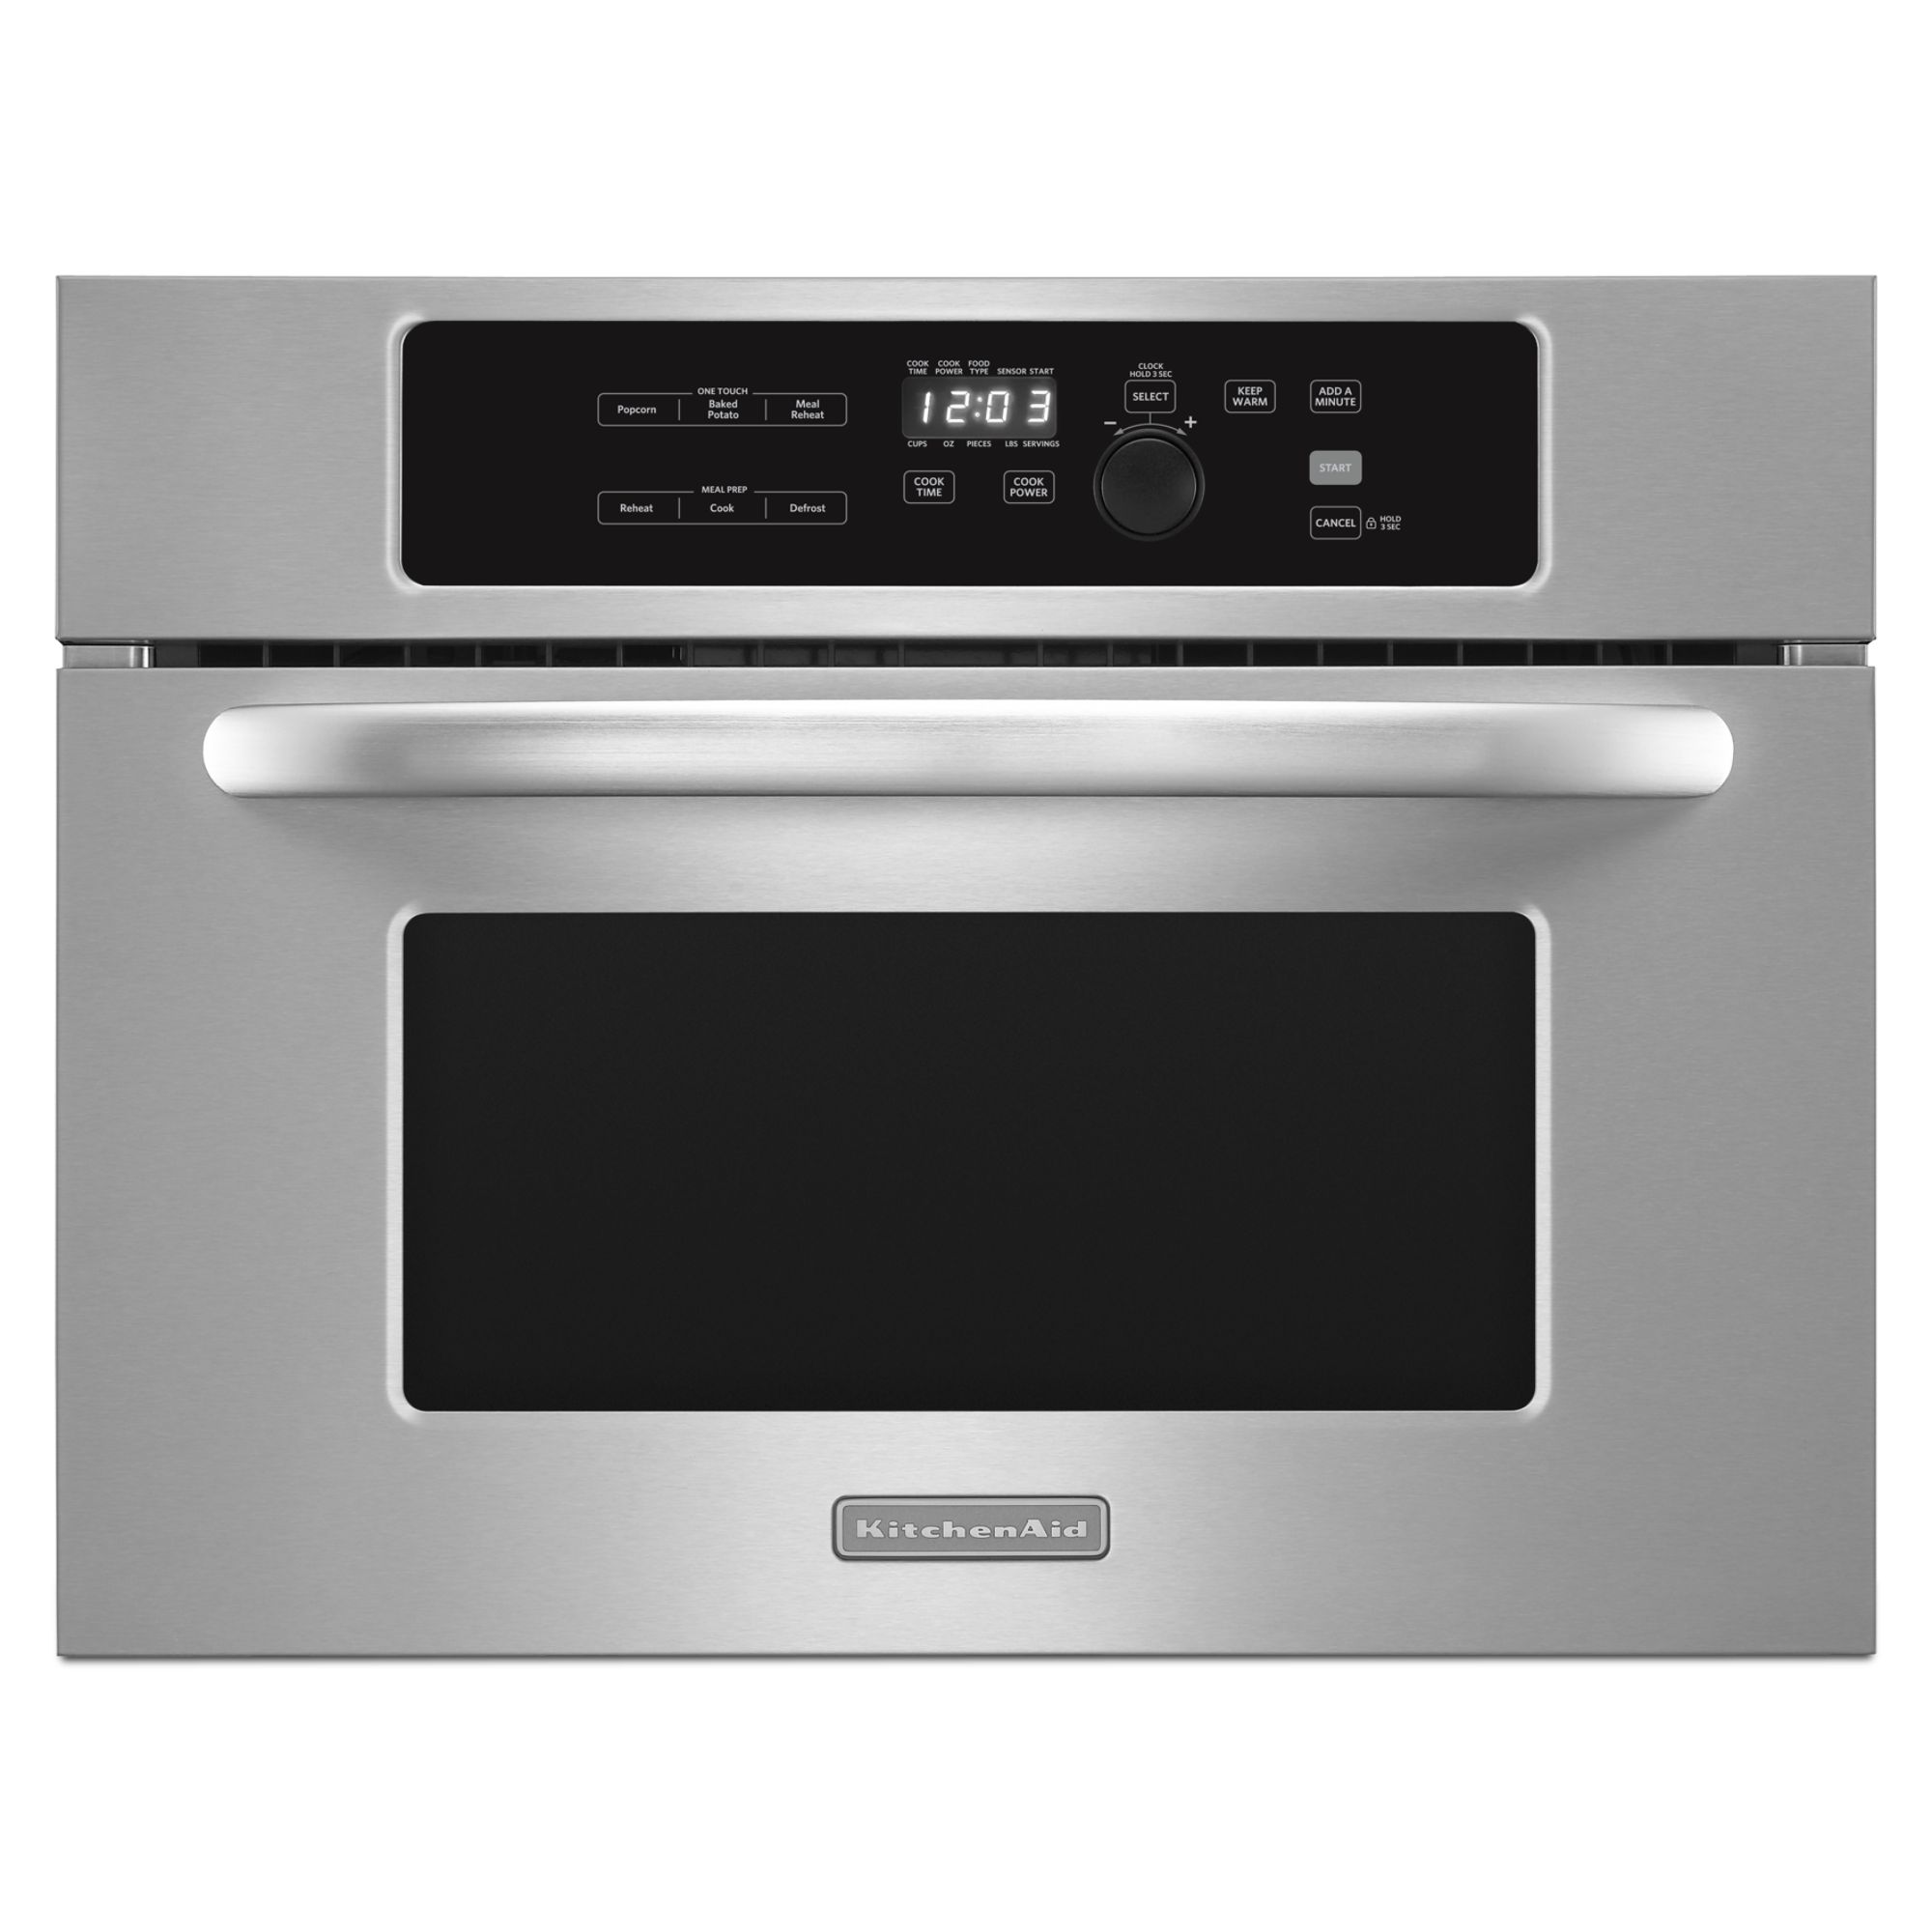 KitchenAid 24 Built-in Microwave Oven - Stainless Steel